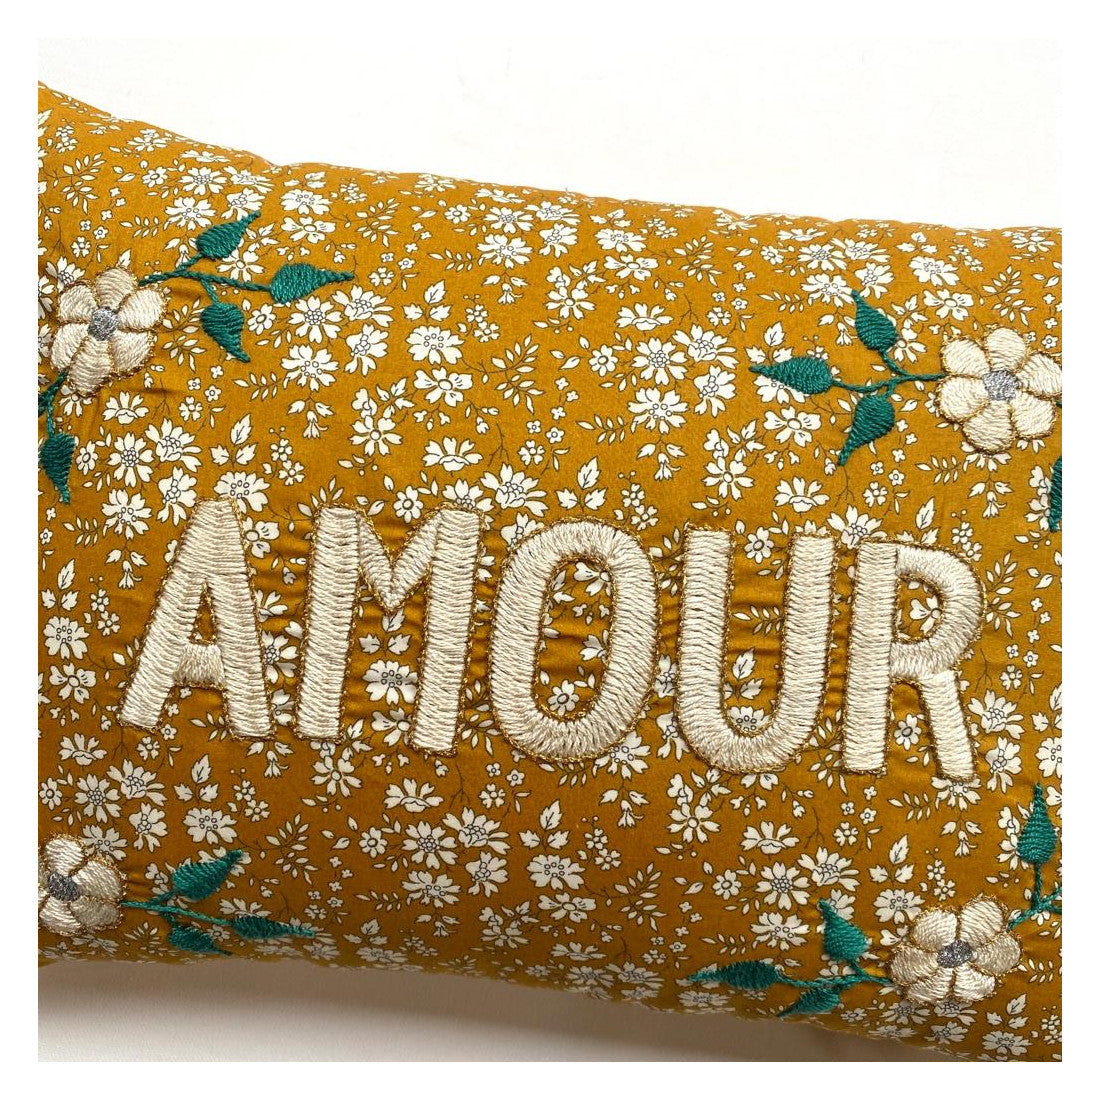 Amour Cushion CSAO in Gold